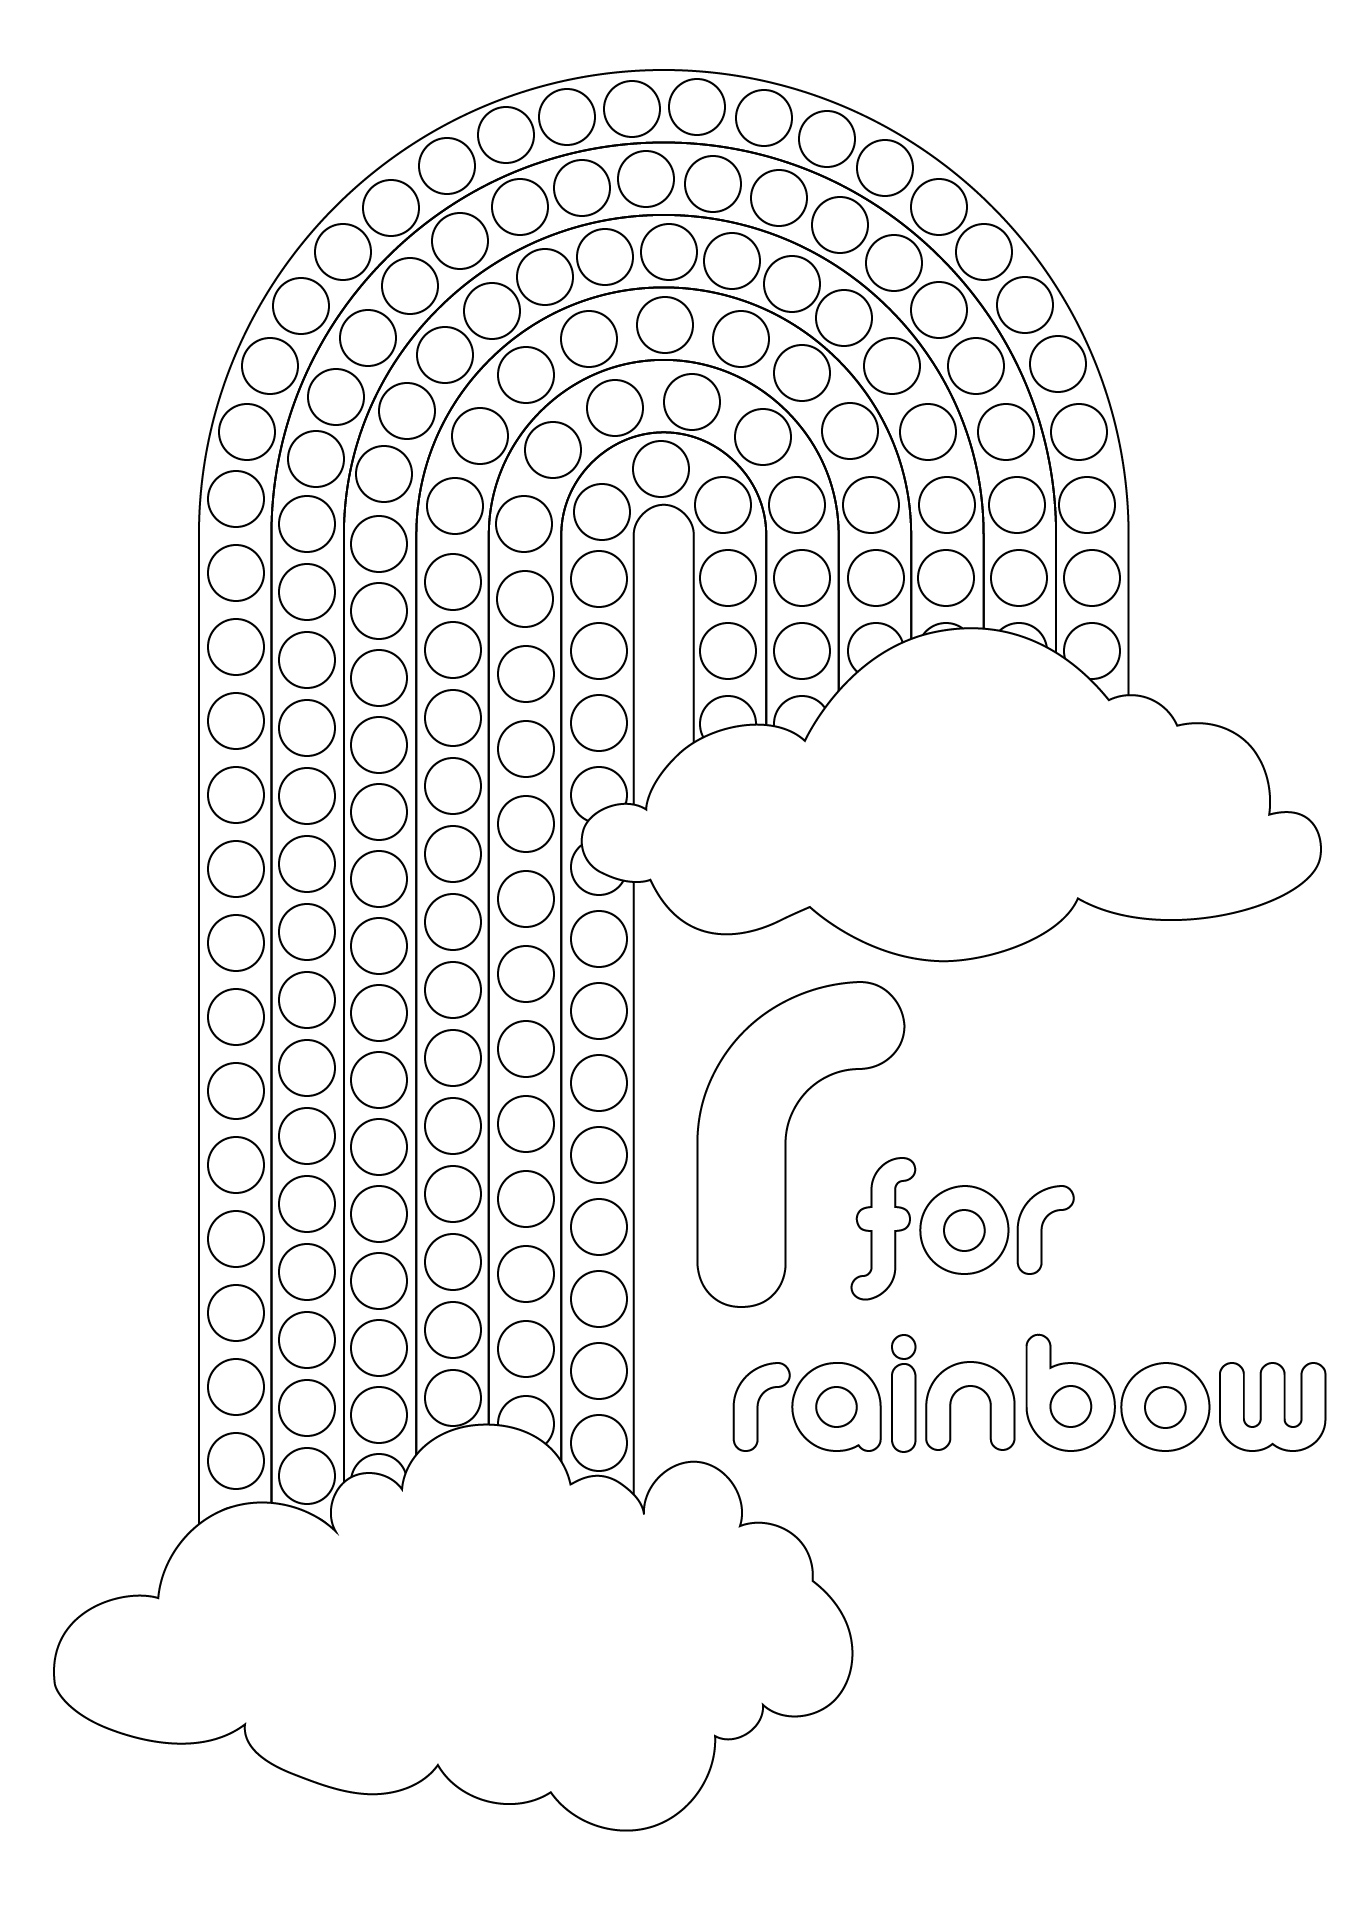 6 Best Images of Dot Rainbow Printable Coloring Pages - Rainbow Dot ...